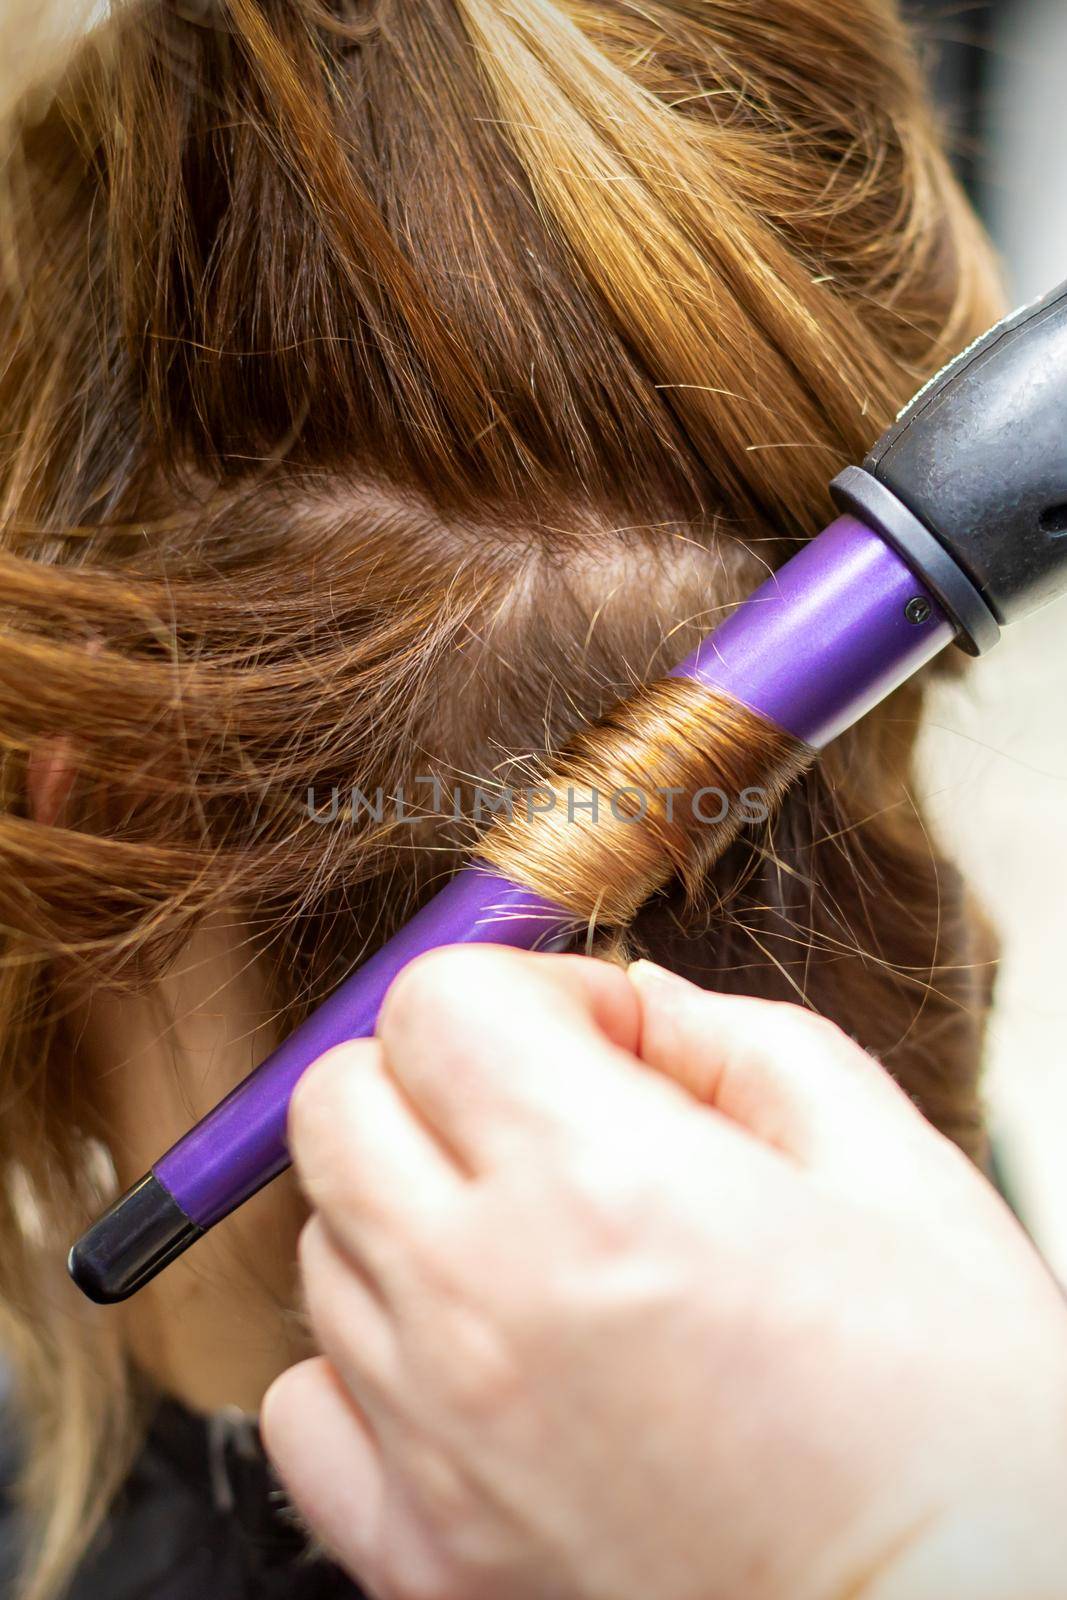 The hairstylist makes curls hairstyle of long brown hair with the curling iron in hairdresser salon, close up